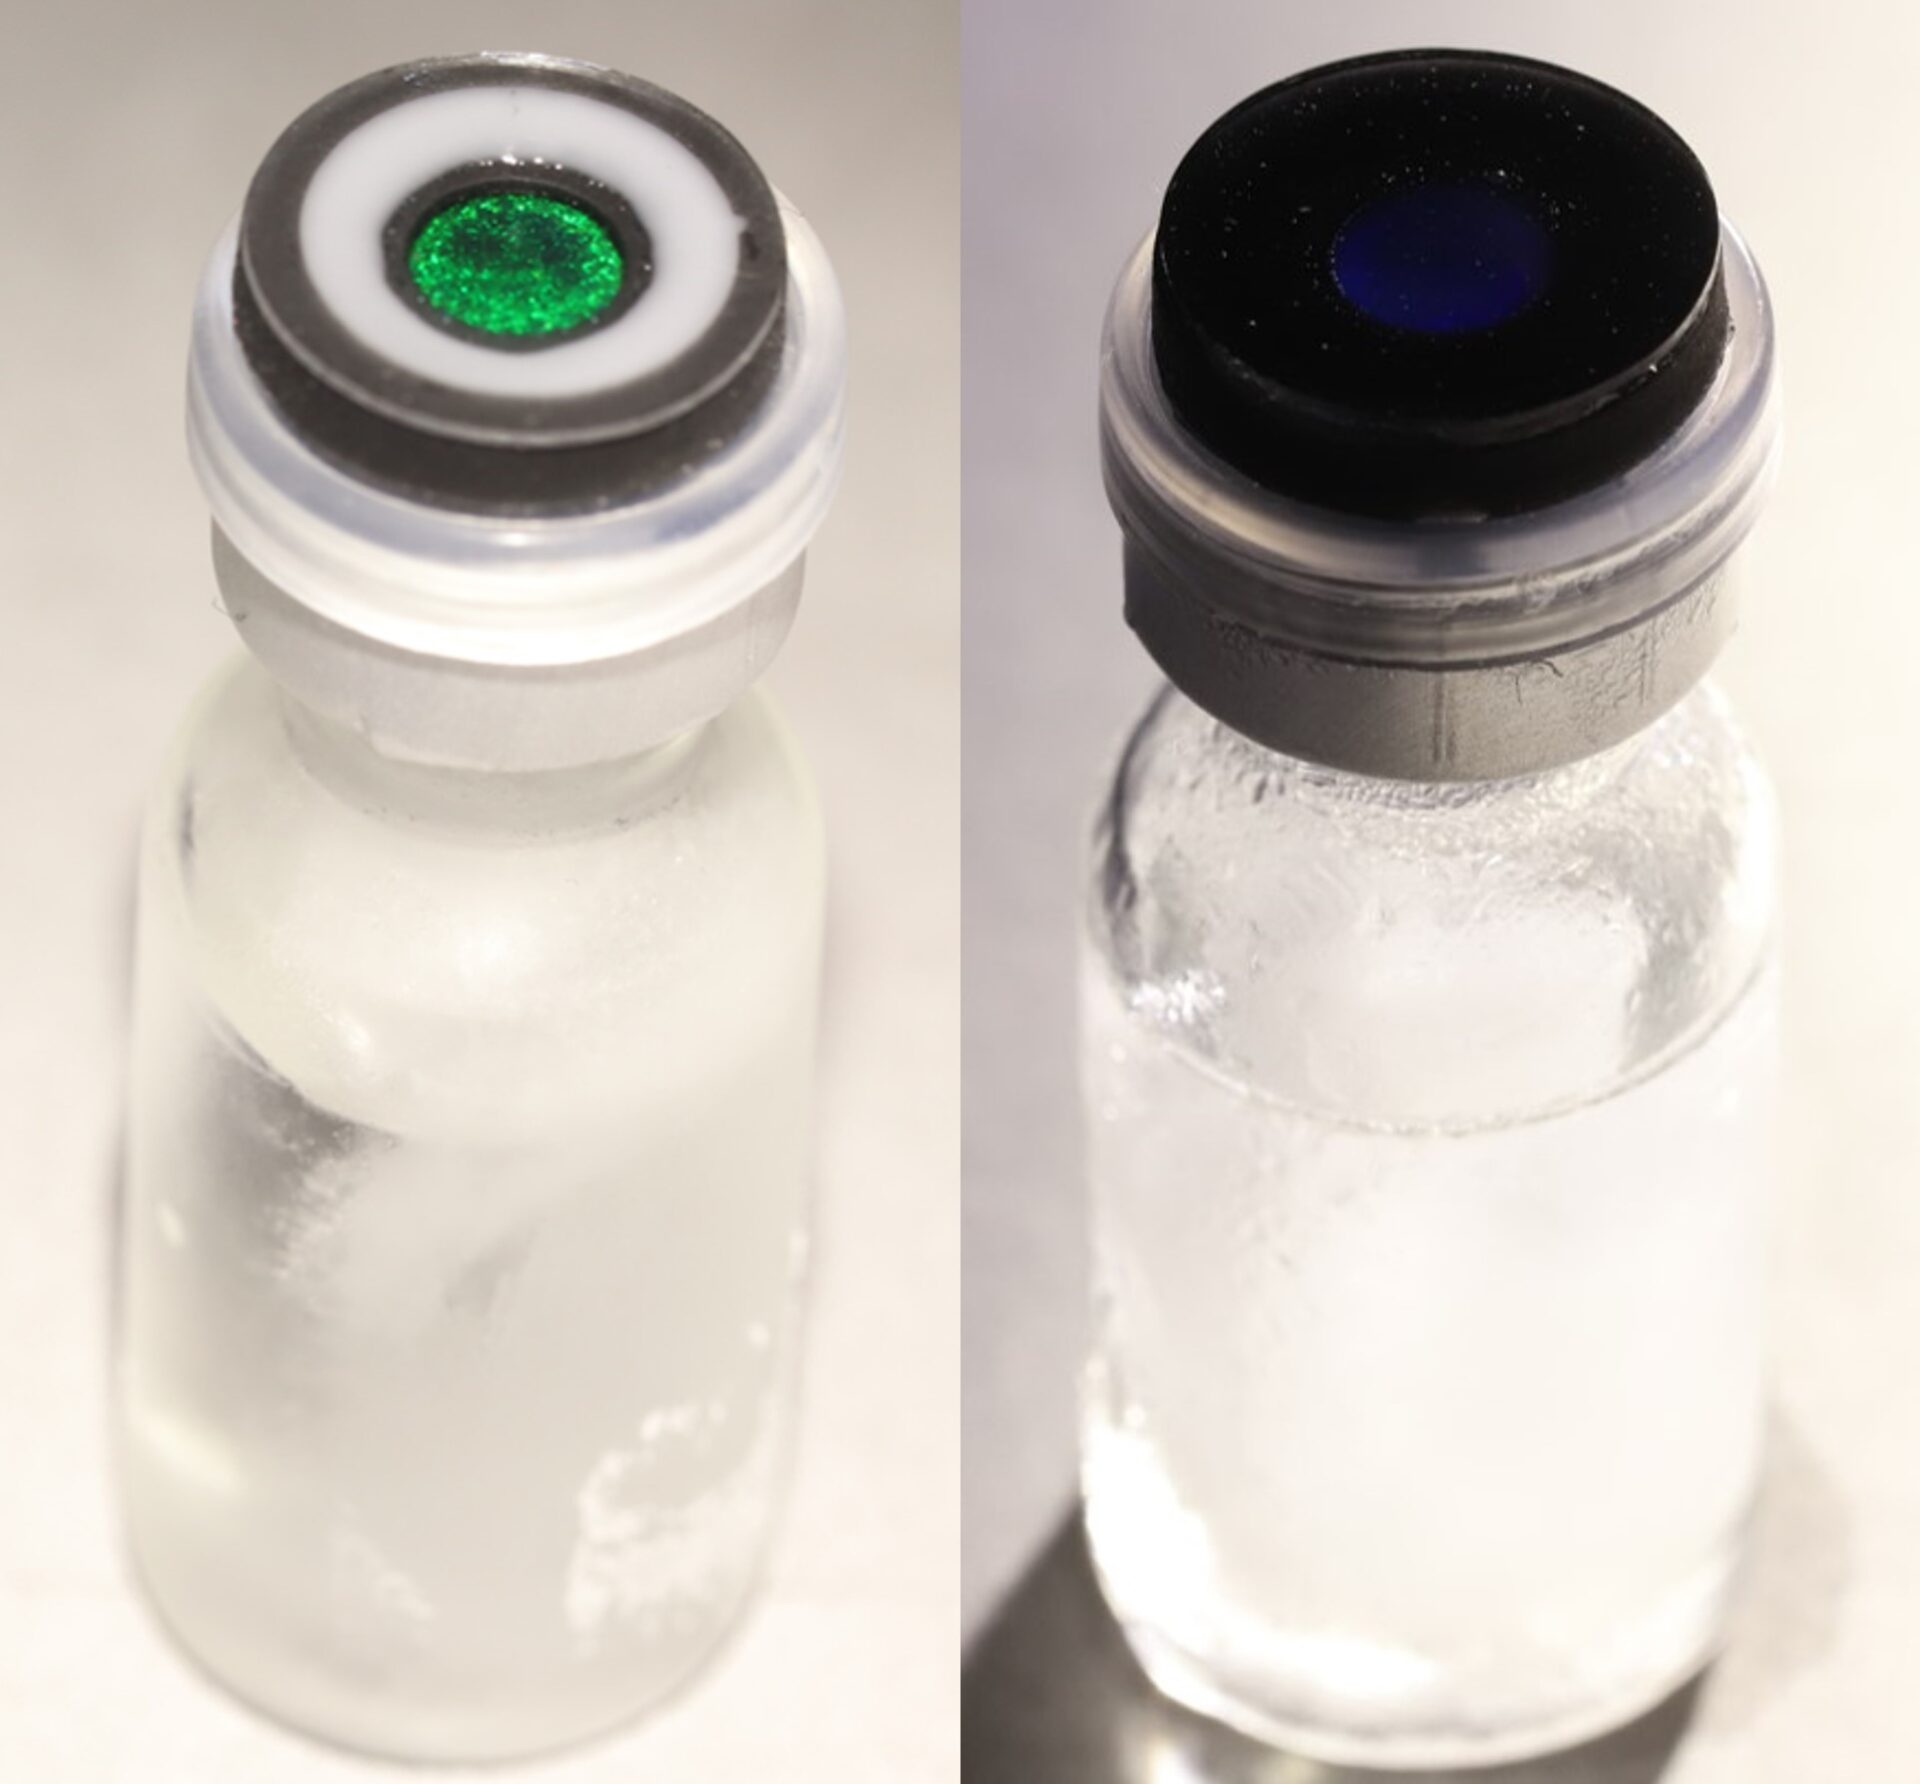 Appearing green on a vial lid (left), this structural color material becomes colorless (right) when warmed. Adapted from ACS Nano 2023, DOI: 10.1021/acsnano.3c00467